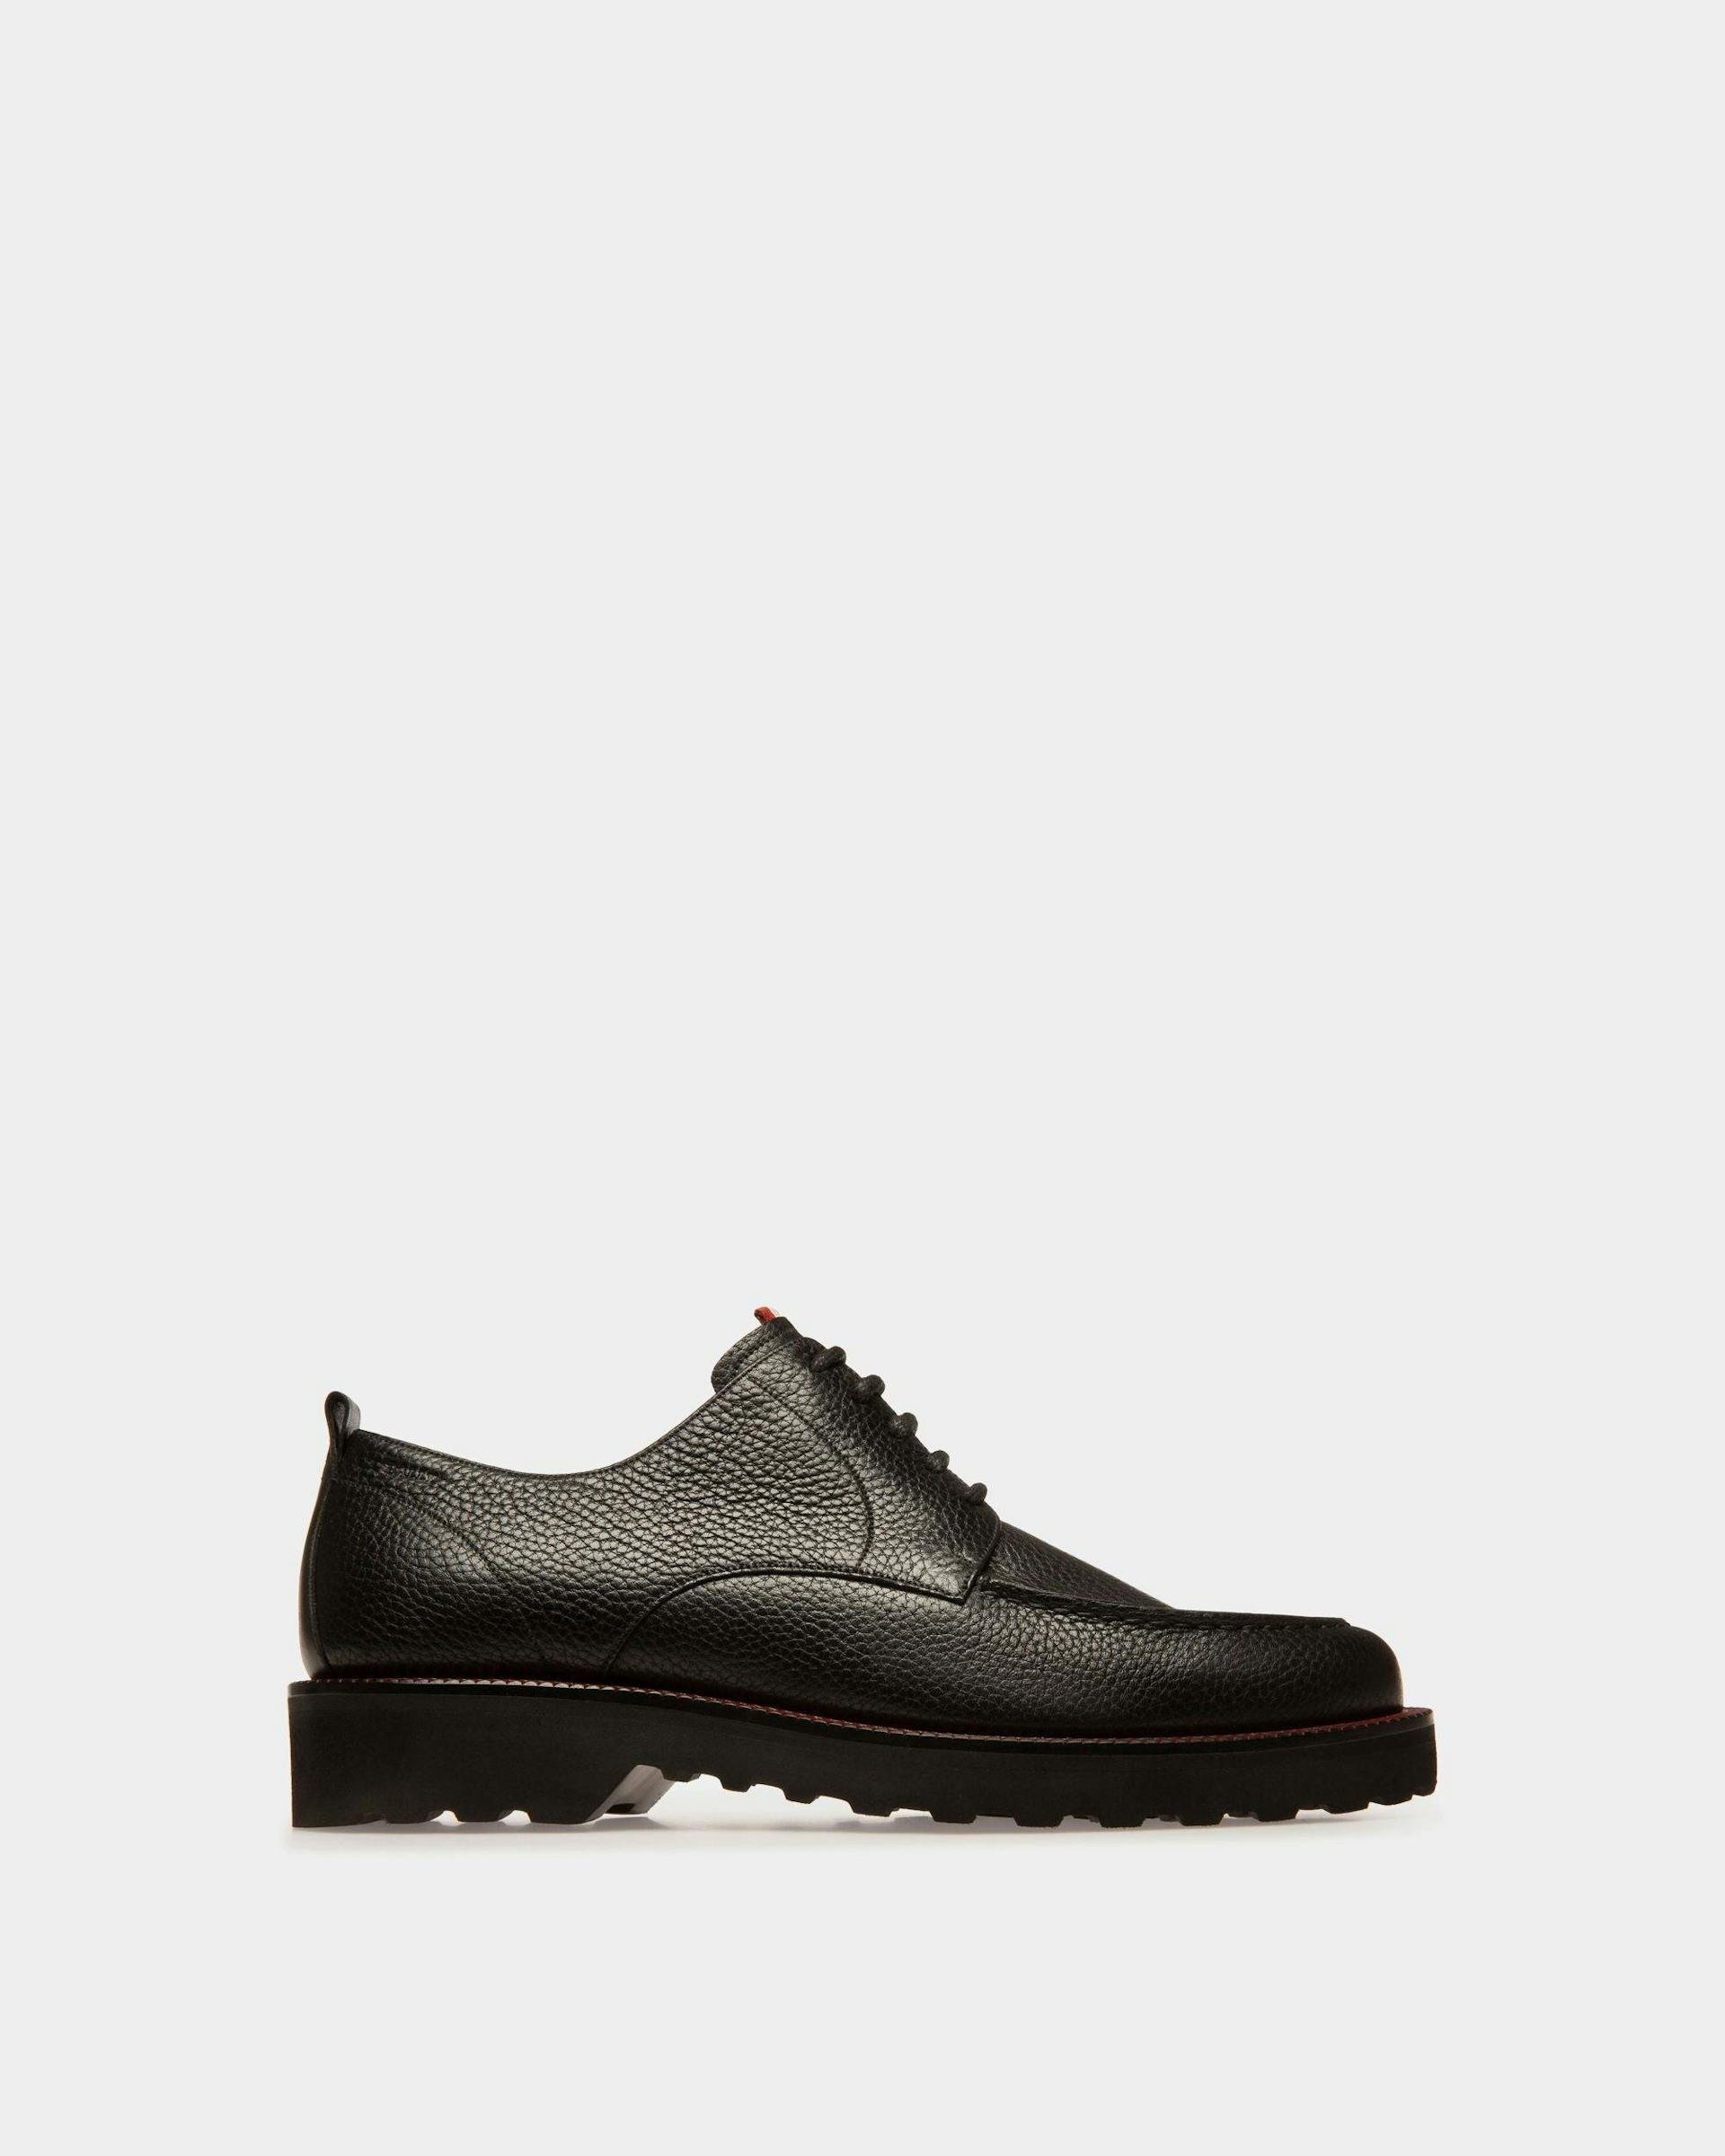 NOTTINGHAM Leather Derby Shoes In Black - Men's - Bally - 01